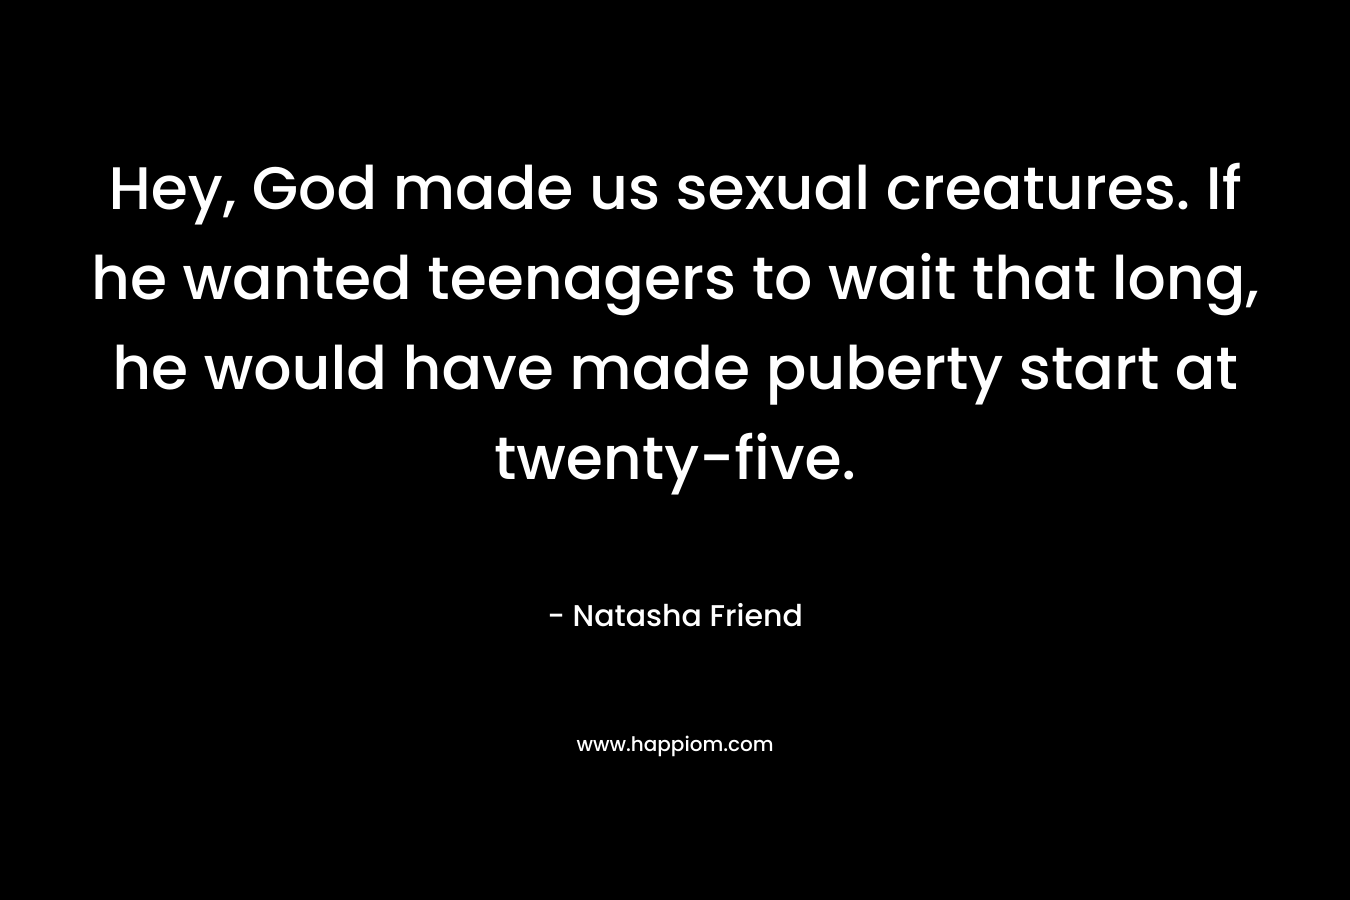 Hey, God made us sexual creatures. If he wanted teenagers to wait that long, he would have made puberty start at twenty-five. – Natasha Friend